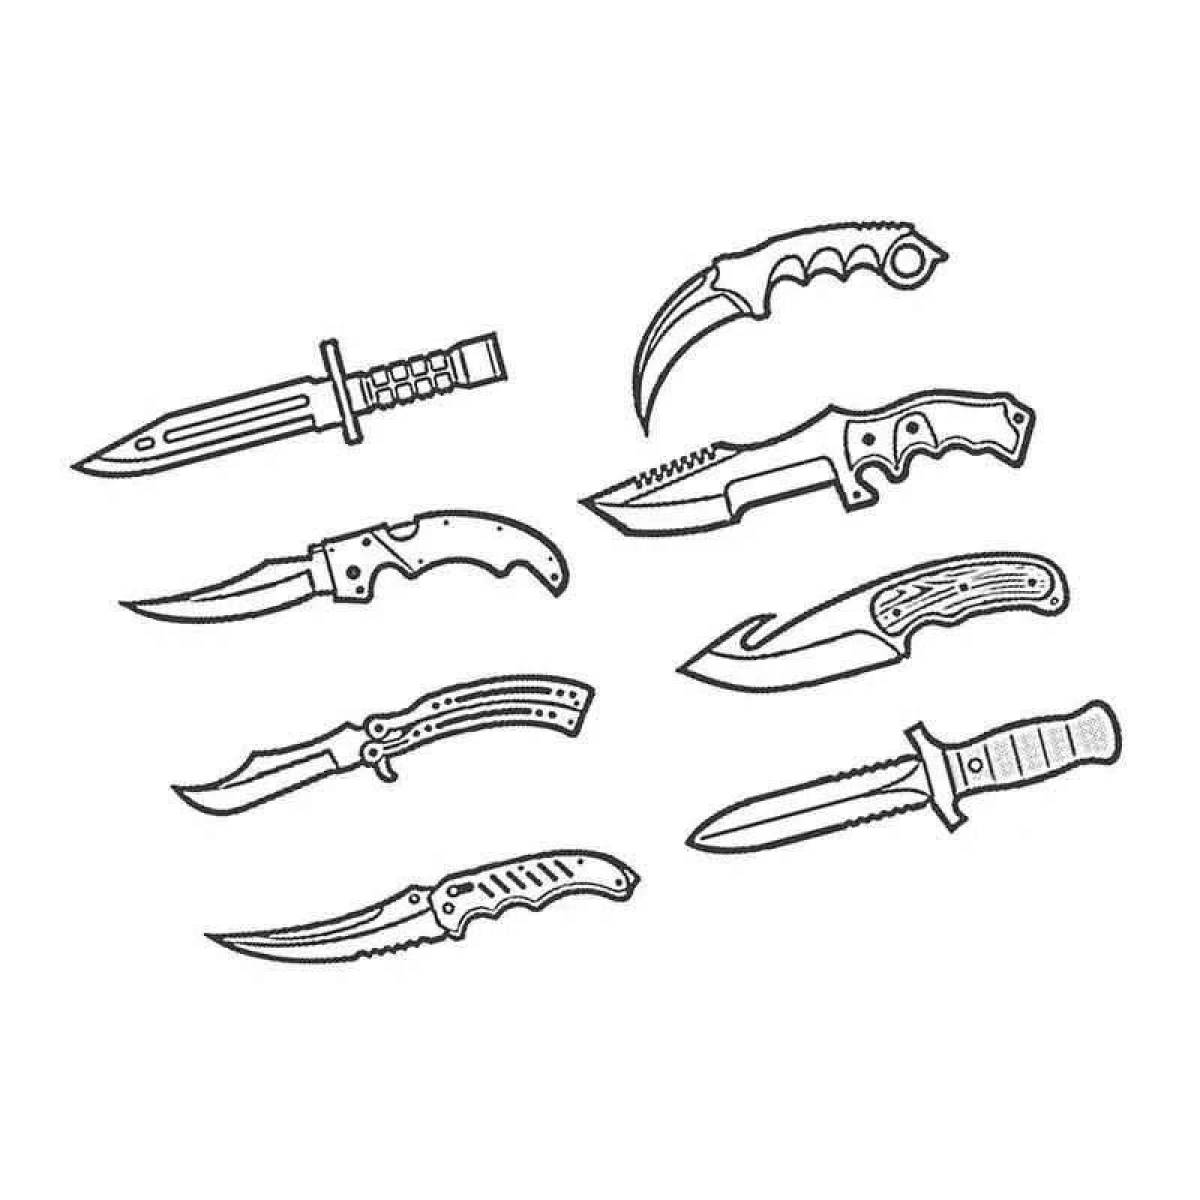 Awesome kukri knife coloring page from standoff 2